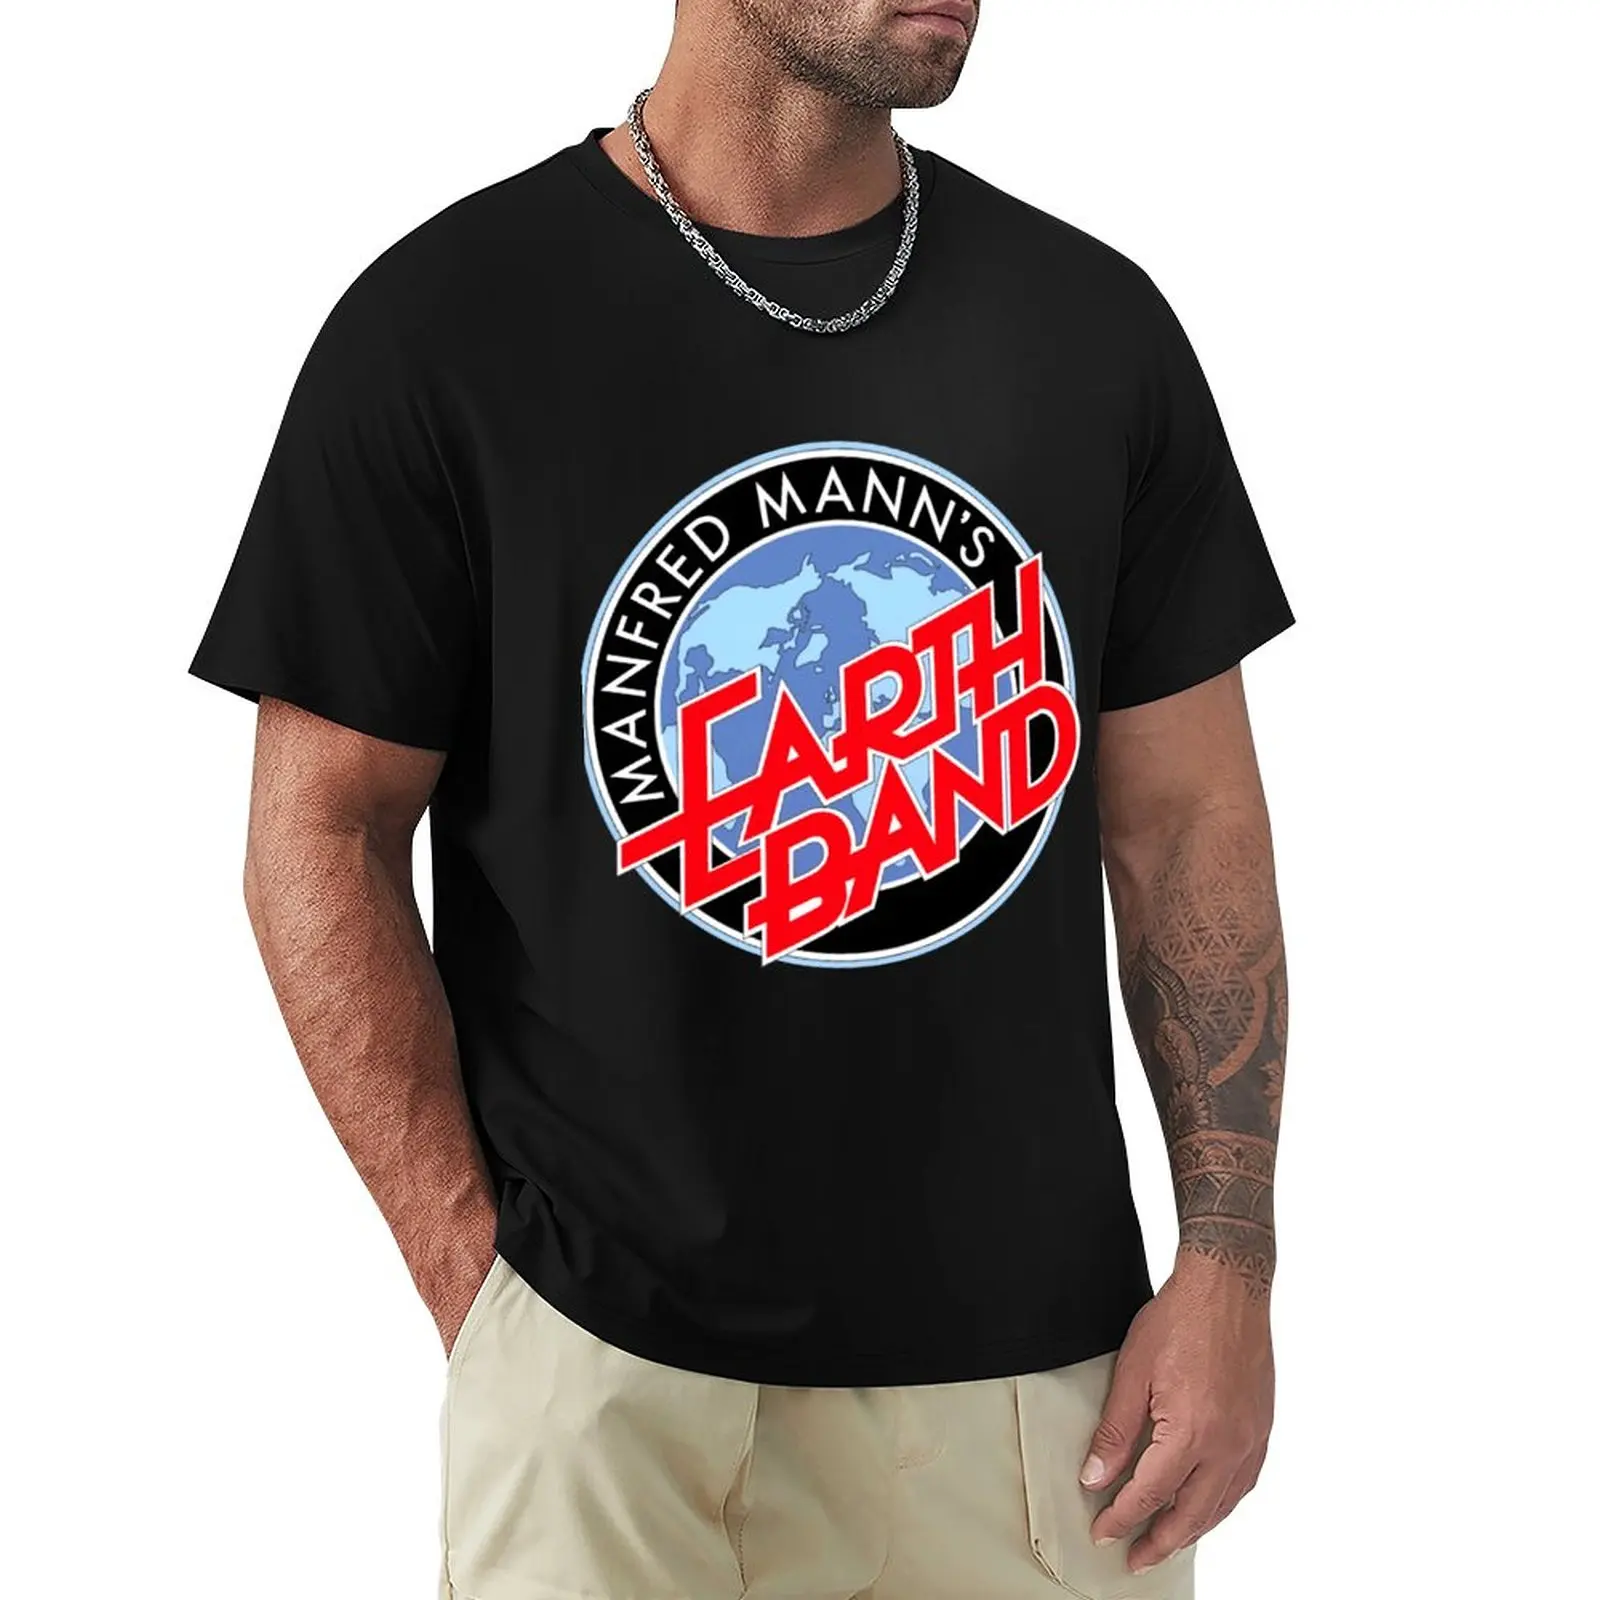 

Manfred Manns Earth Band For Men For Women Classic Retro Customize Classic . T-Shirt cute tops summer top men clothes